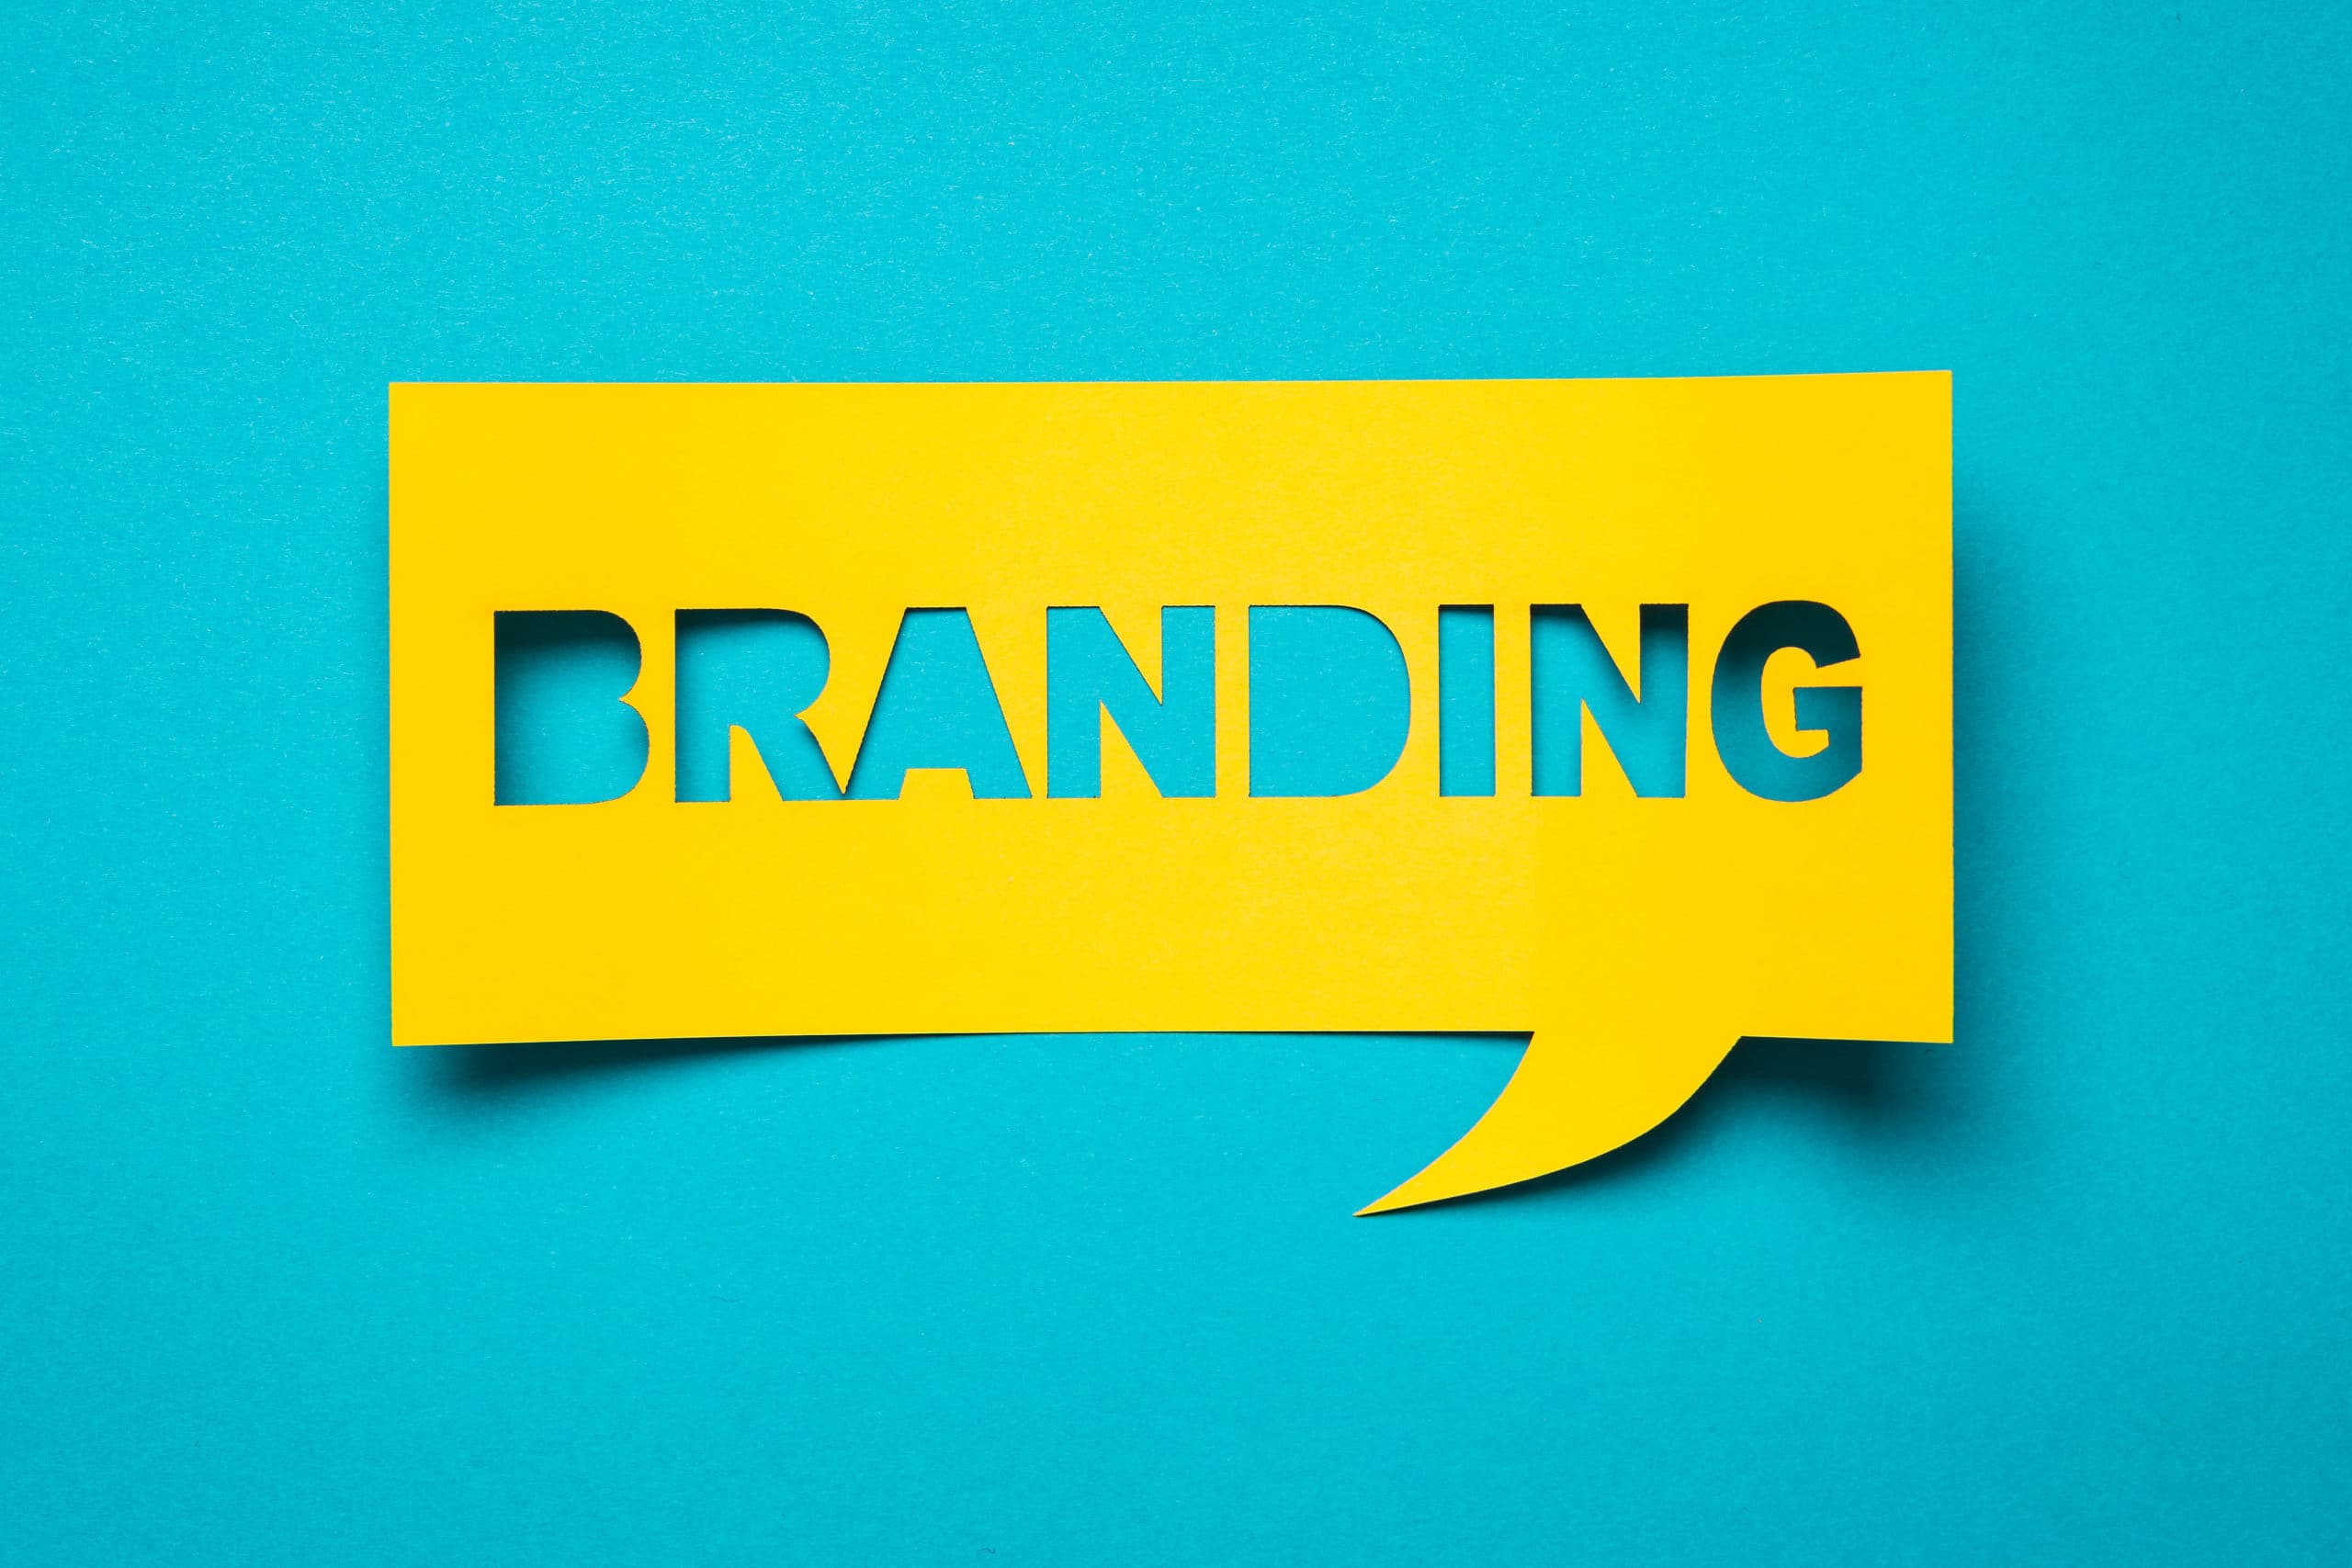 Brand awareness can create your competitive edge